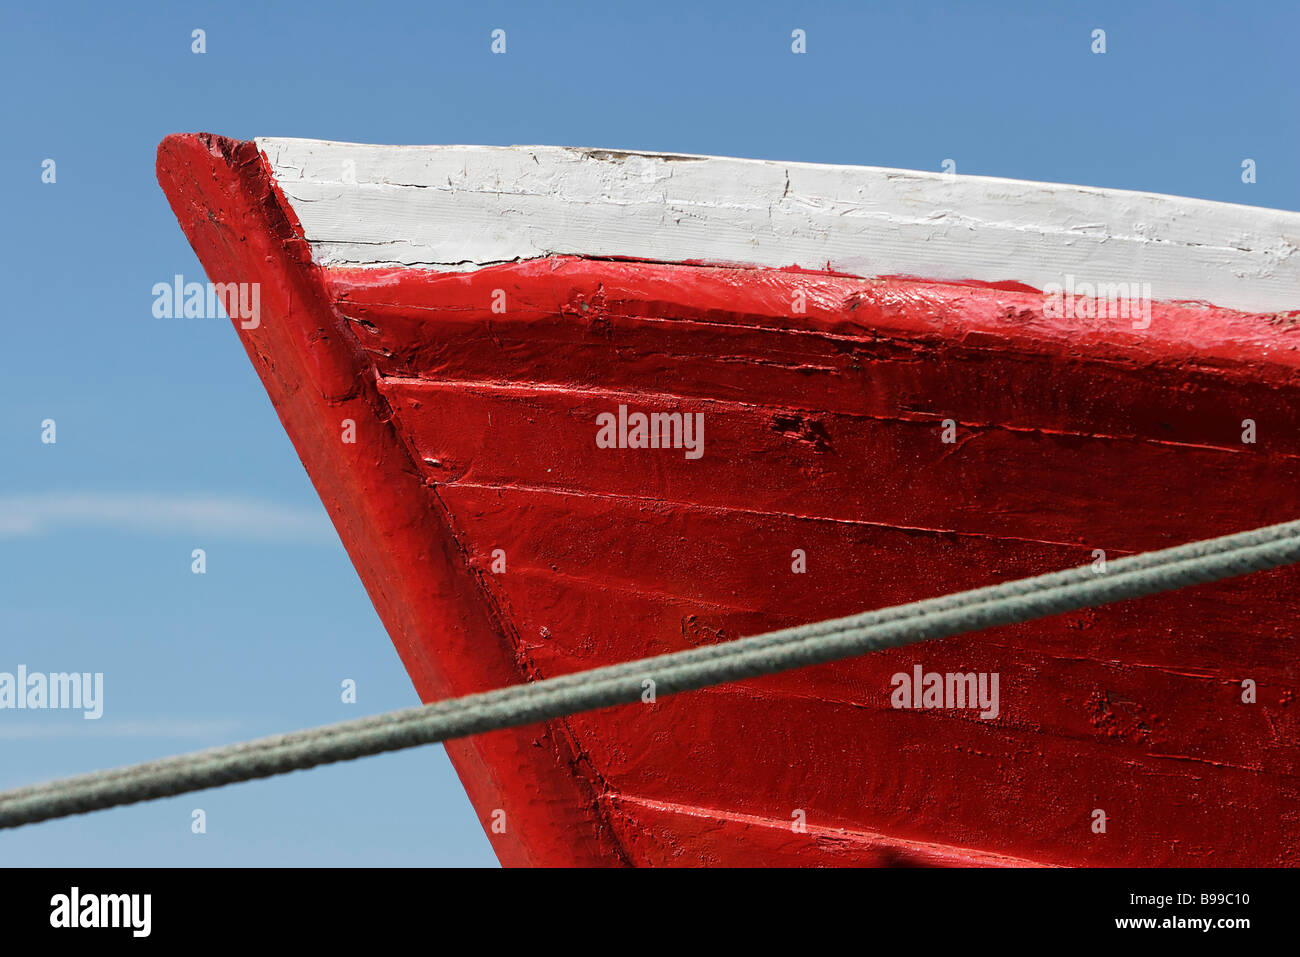 Prow of boat, extreme close-up Stock Photo